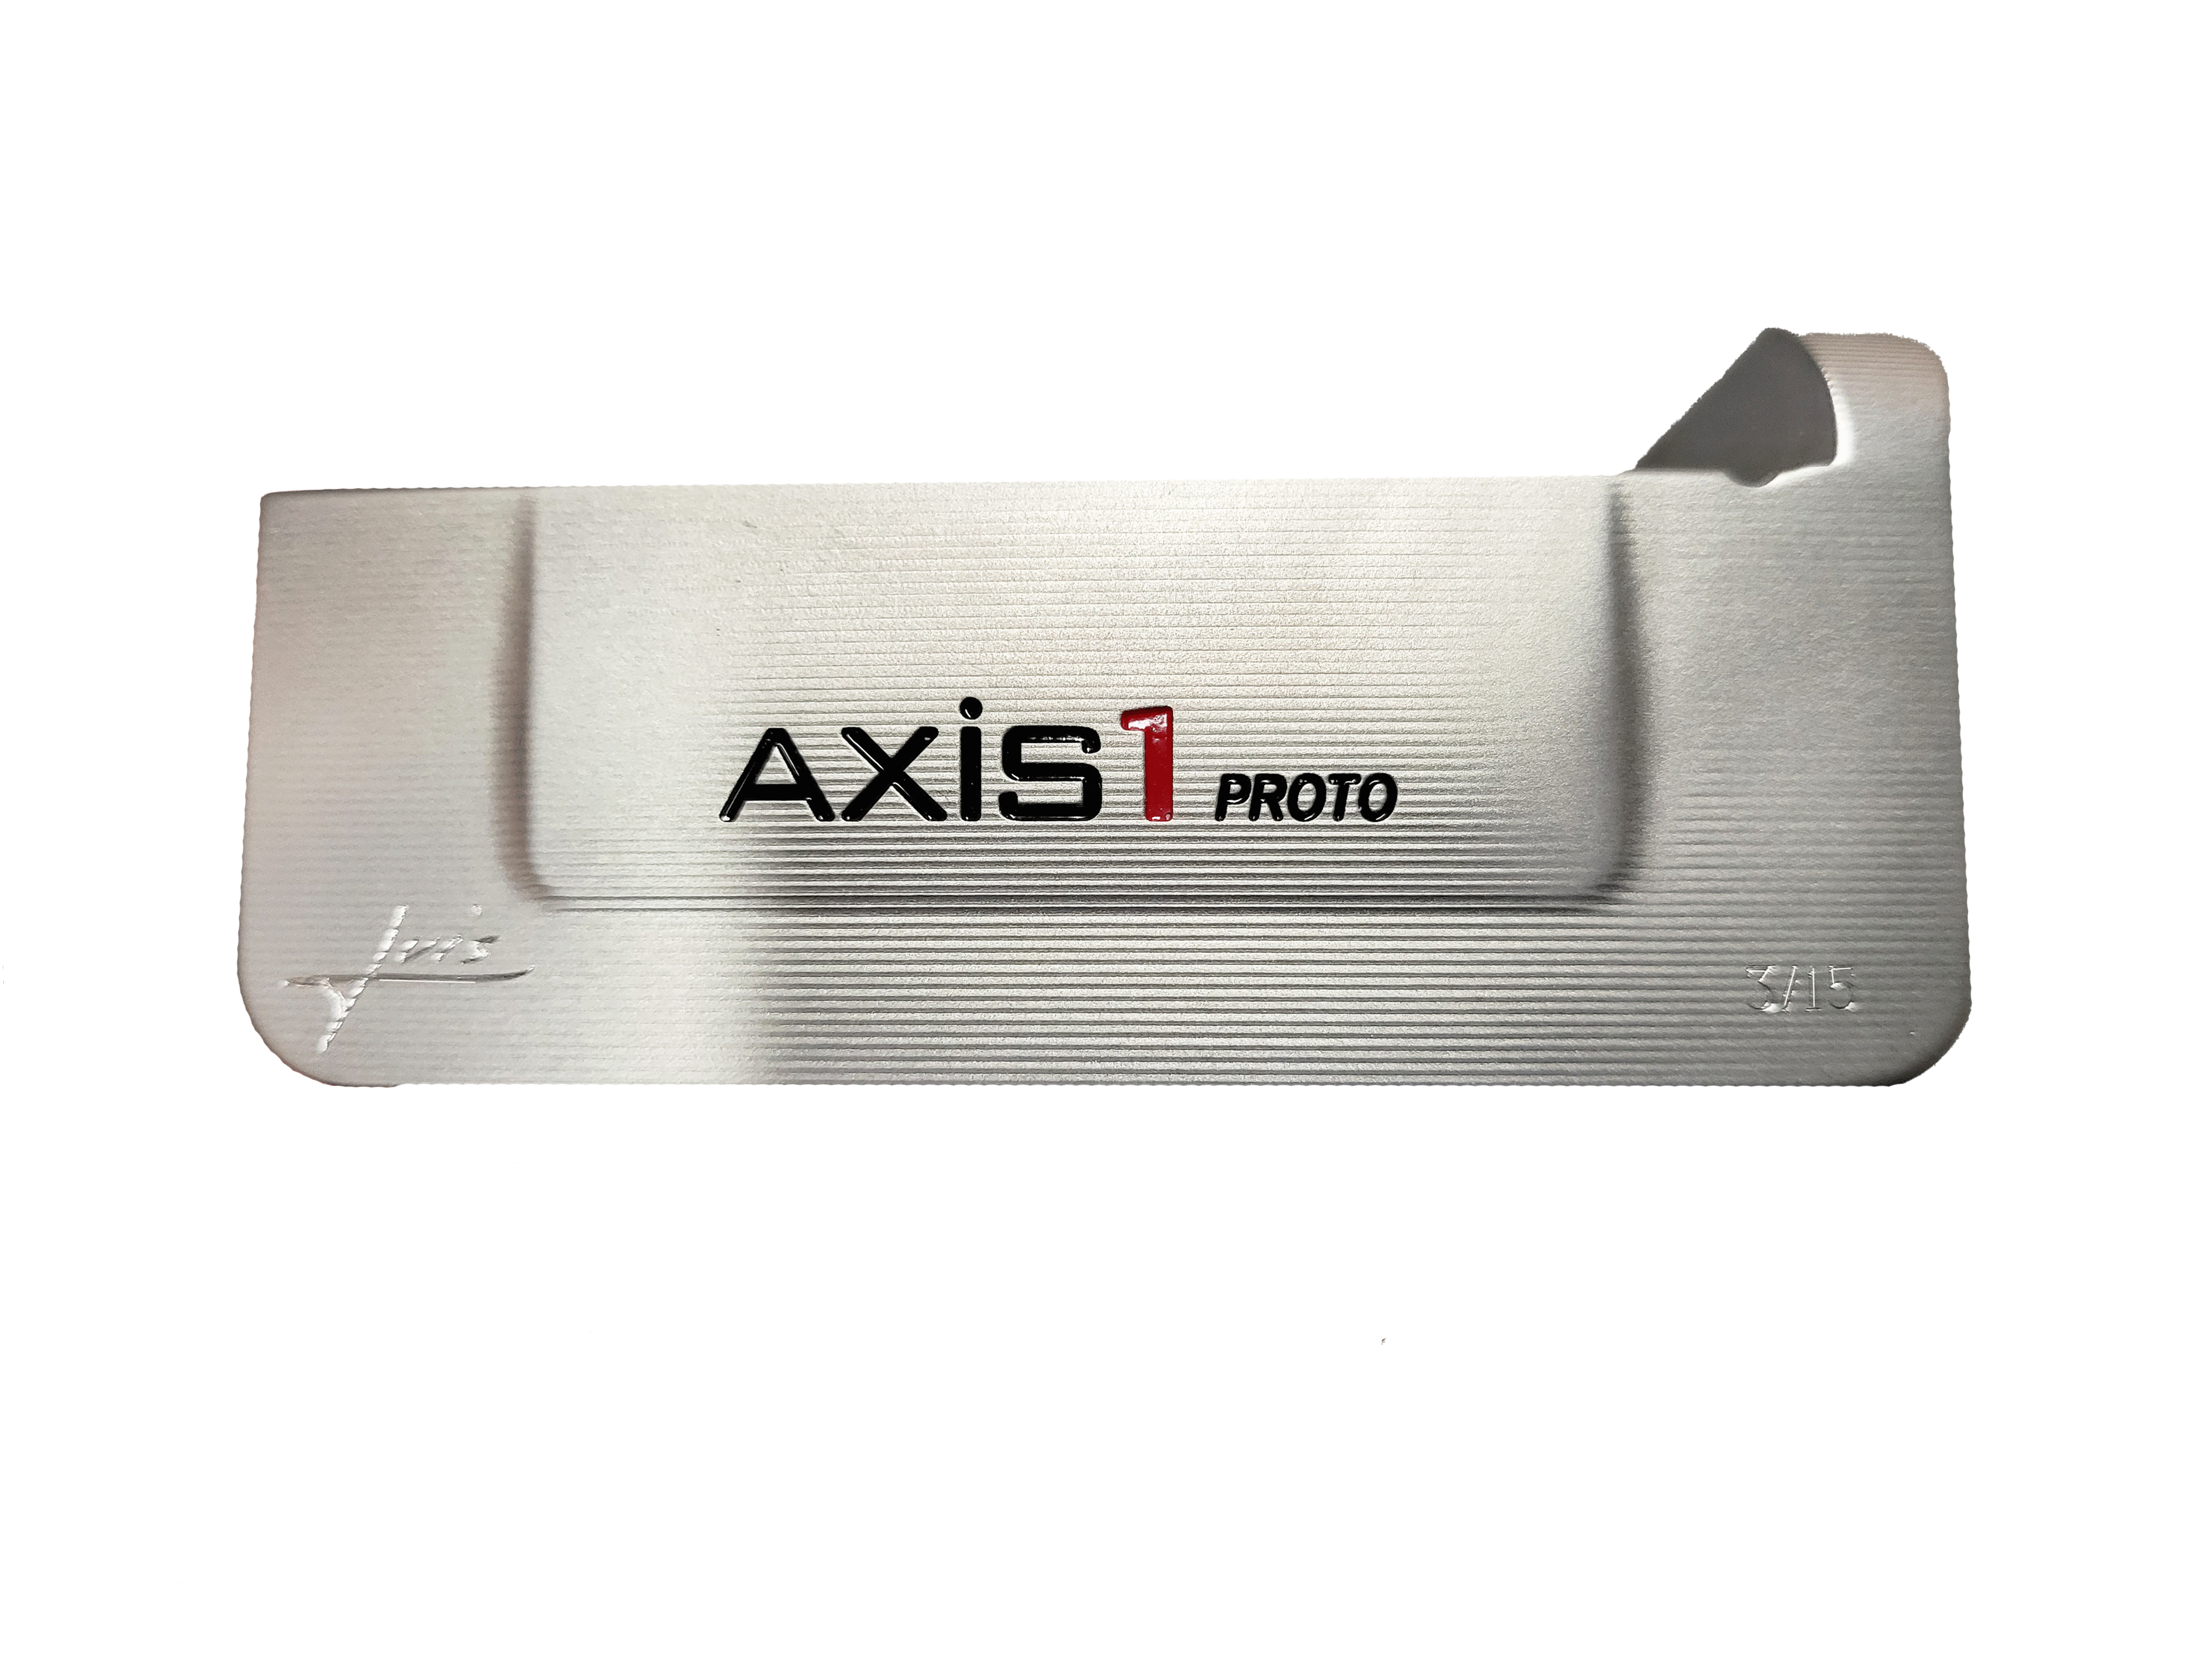 Limited Edition: Axis1 Proto